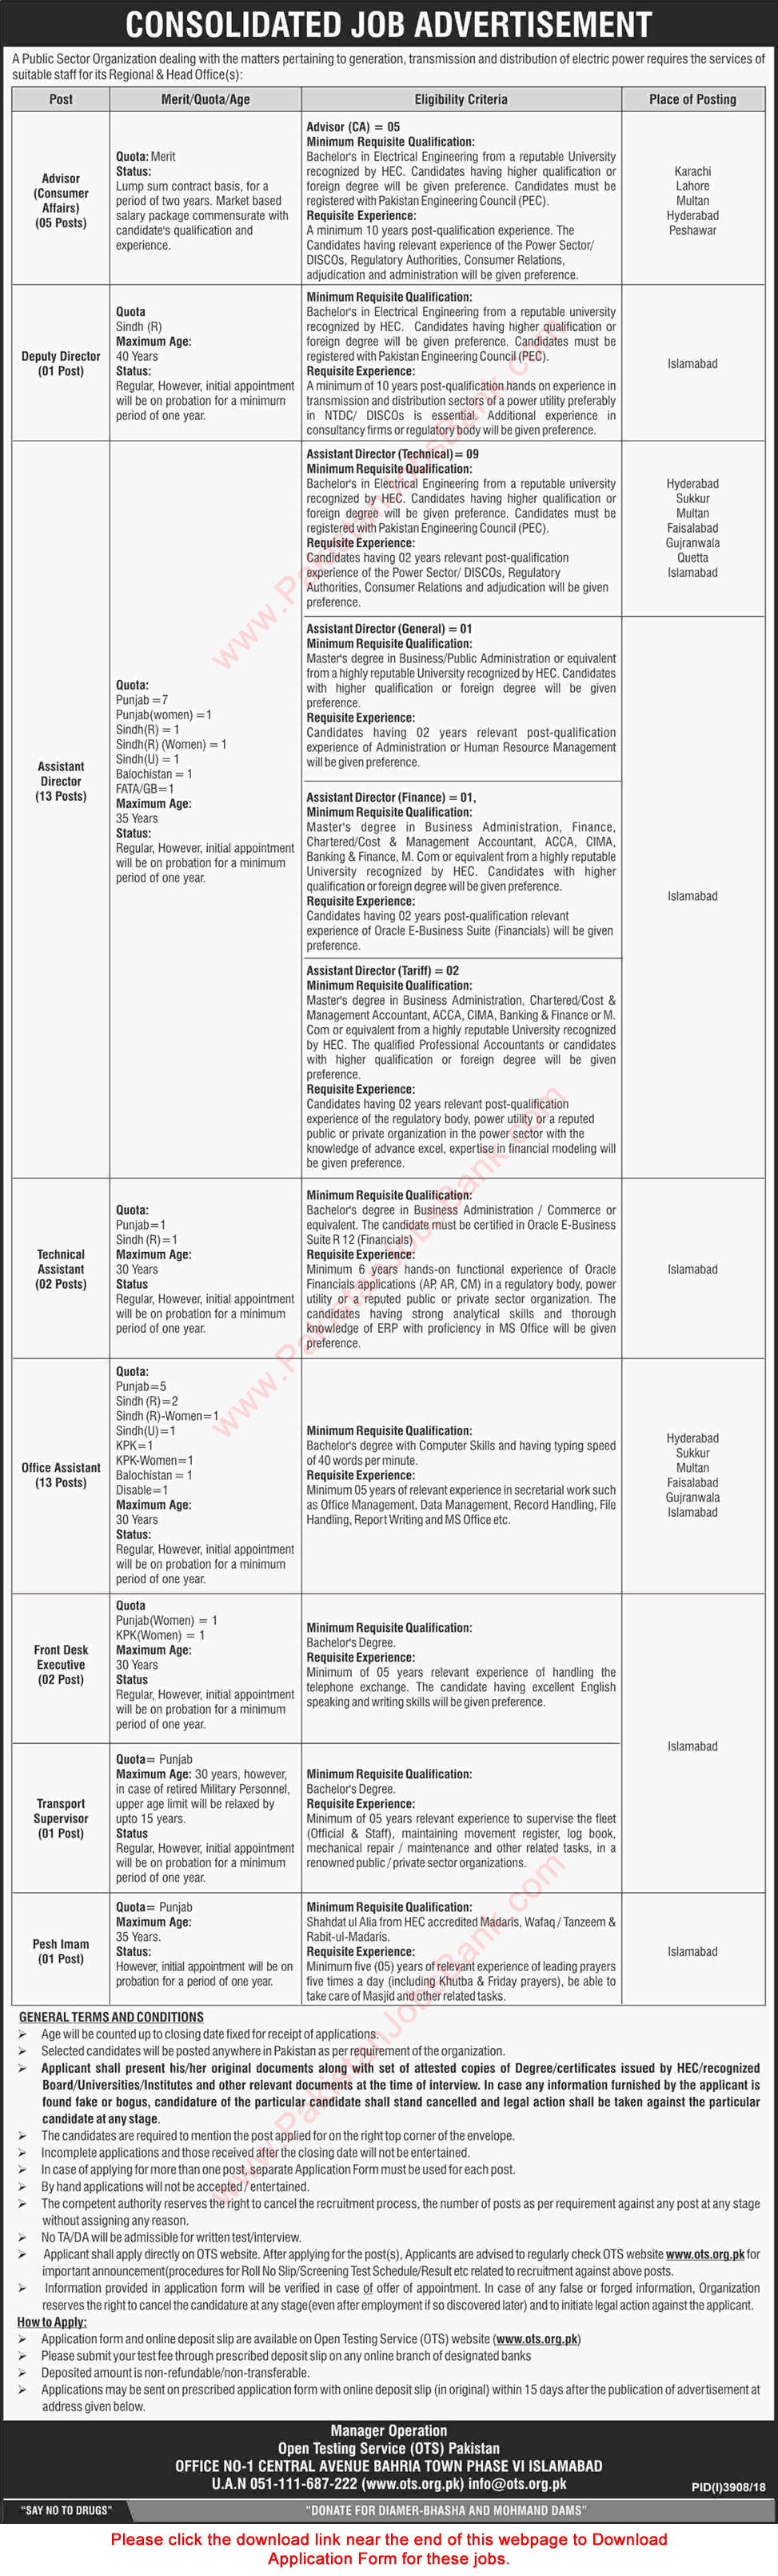 Public Sector Organization Jobs February 2019 OTS Application Form Assistant Directors, Office Assistants & Others Latest